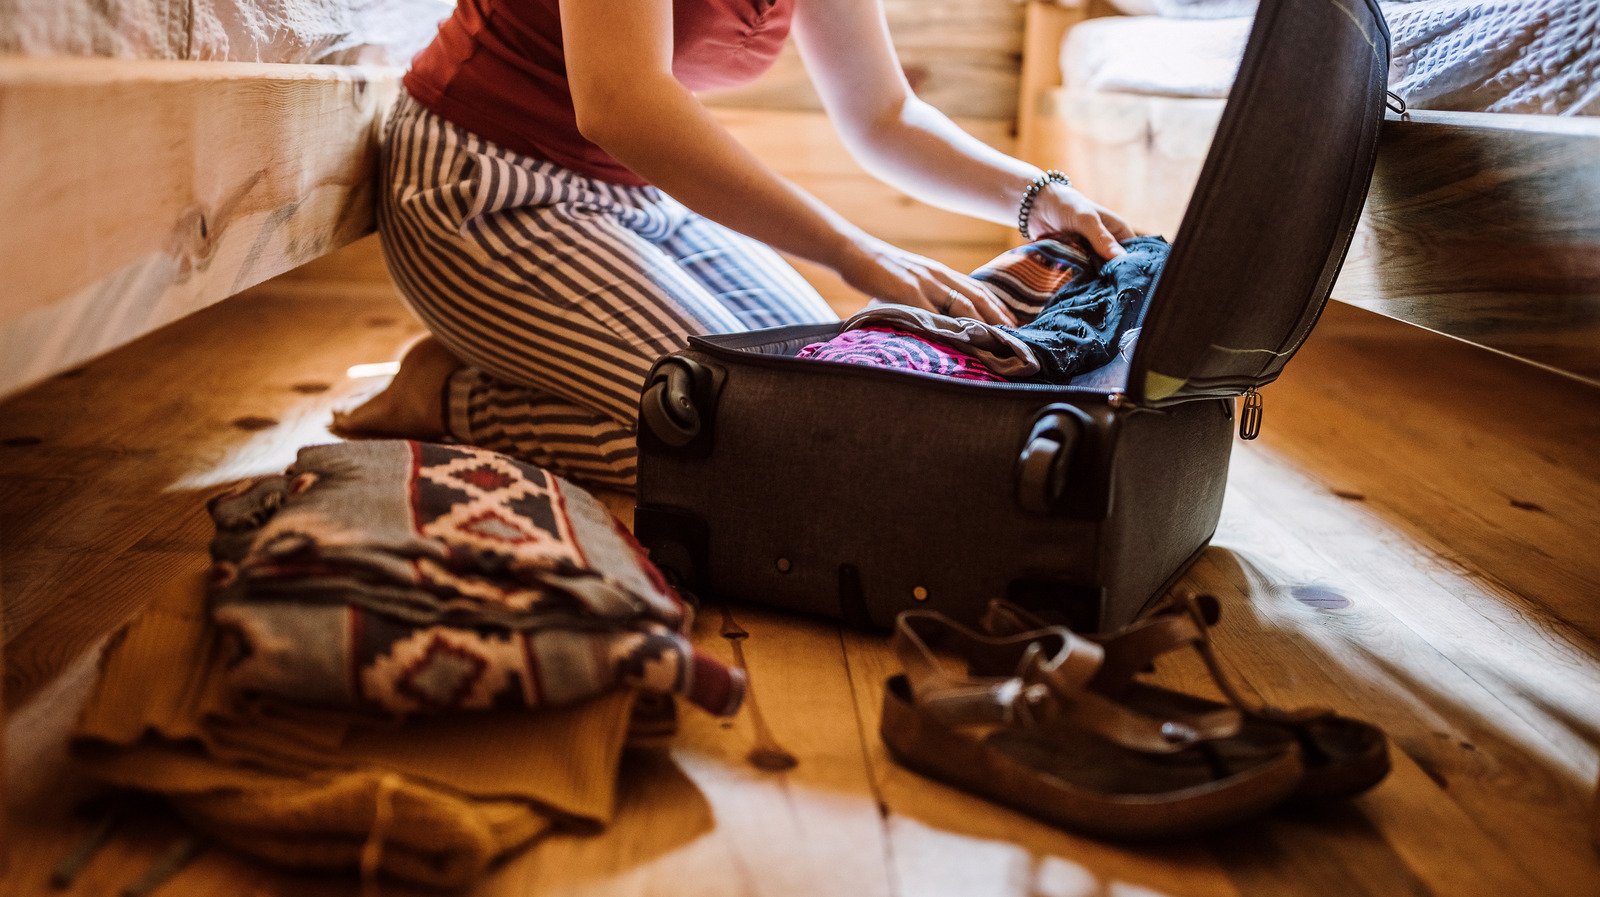 Make Unpacking After Your Trip Even Easier With This TikTok Hack